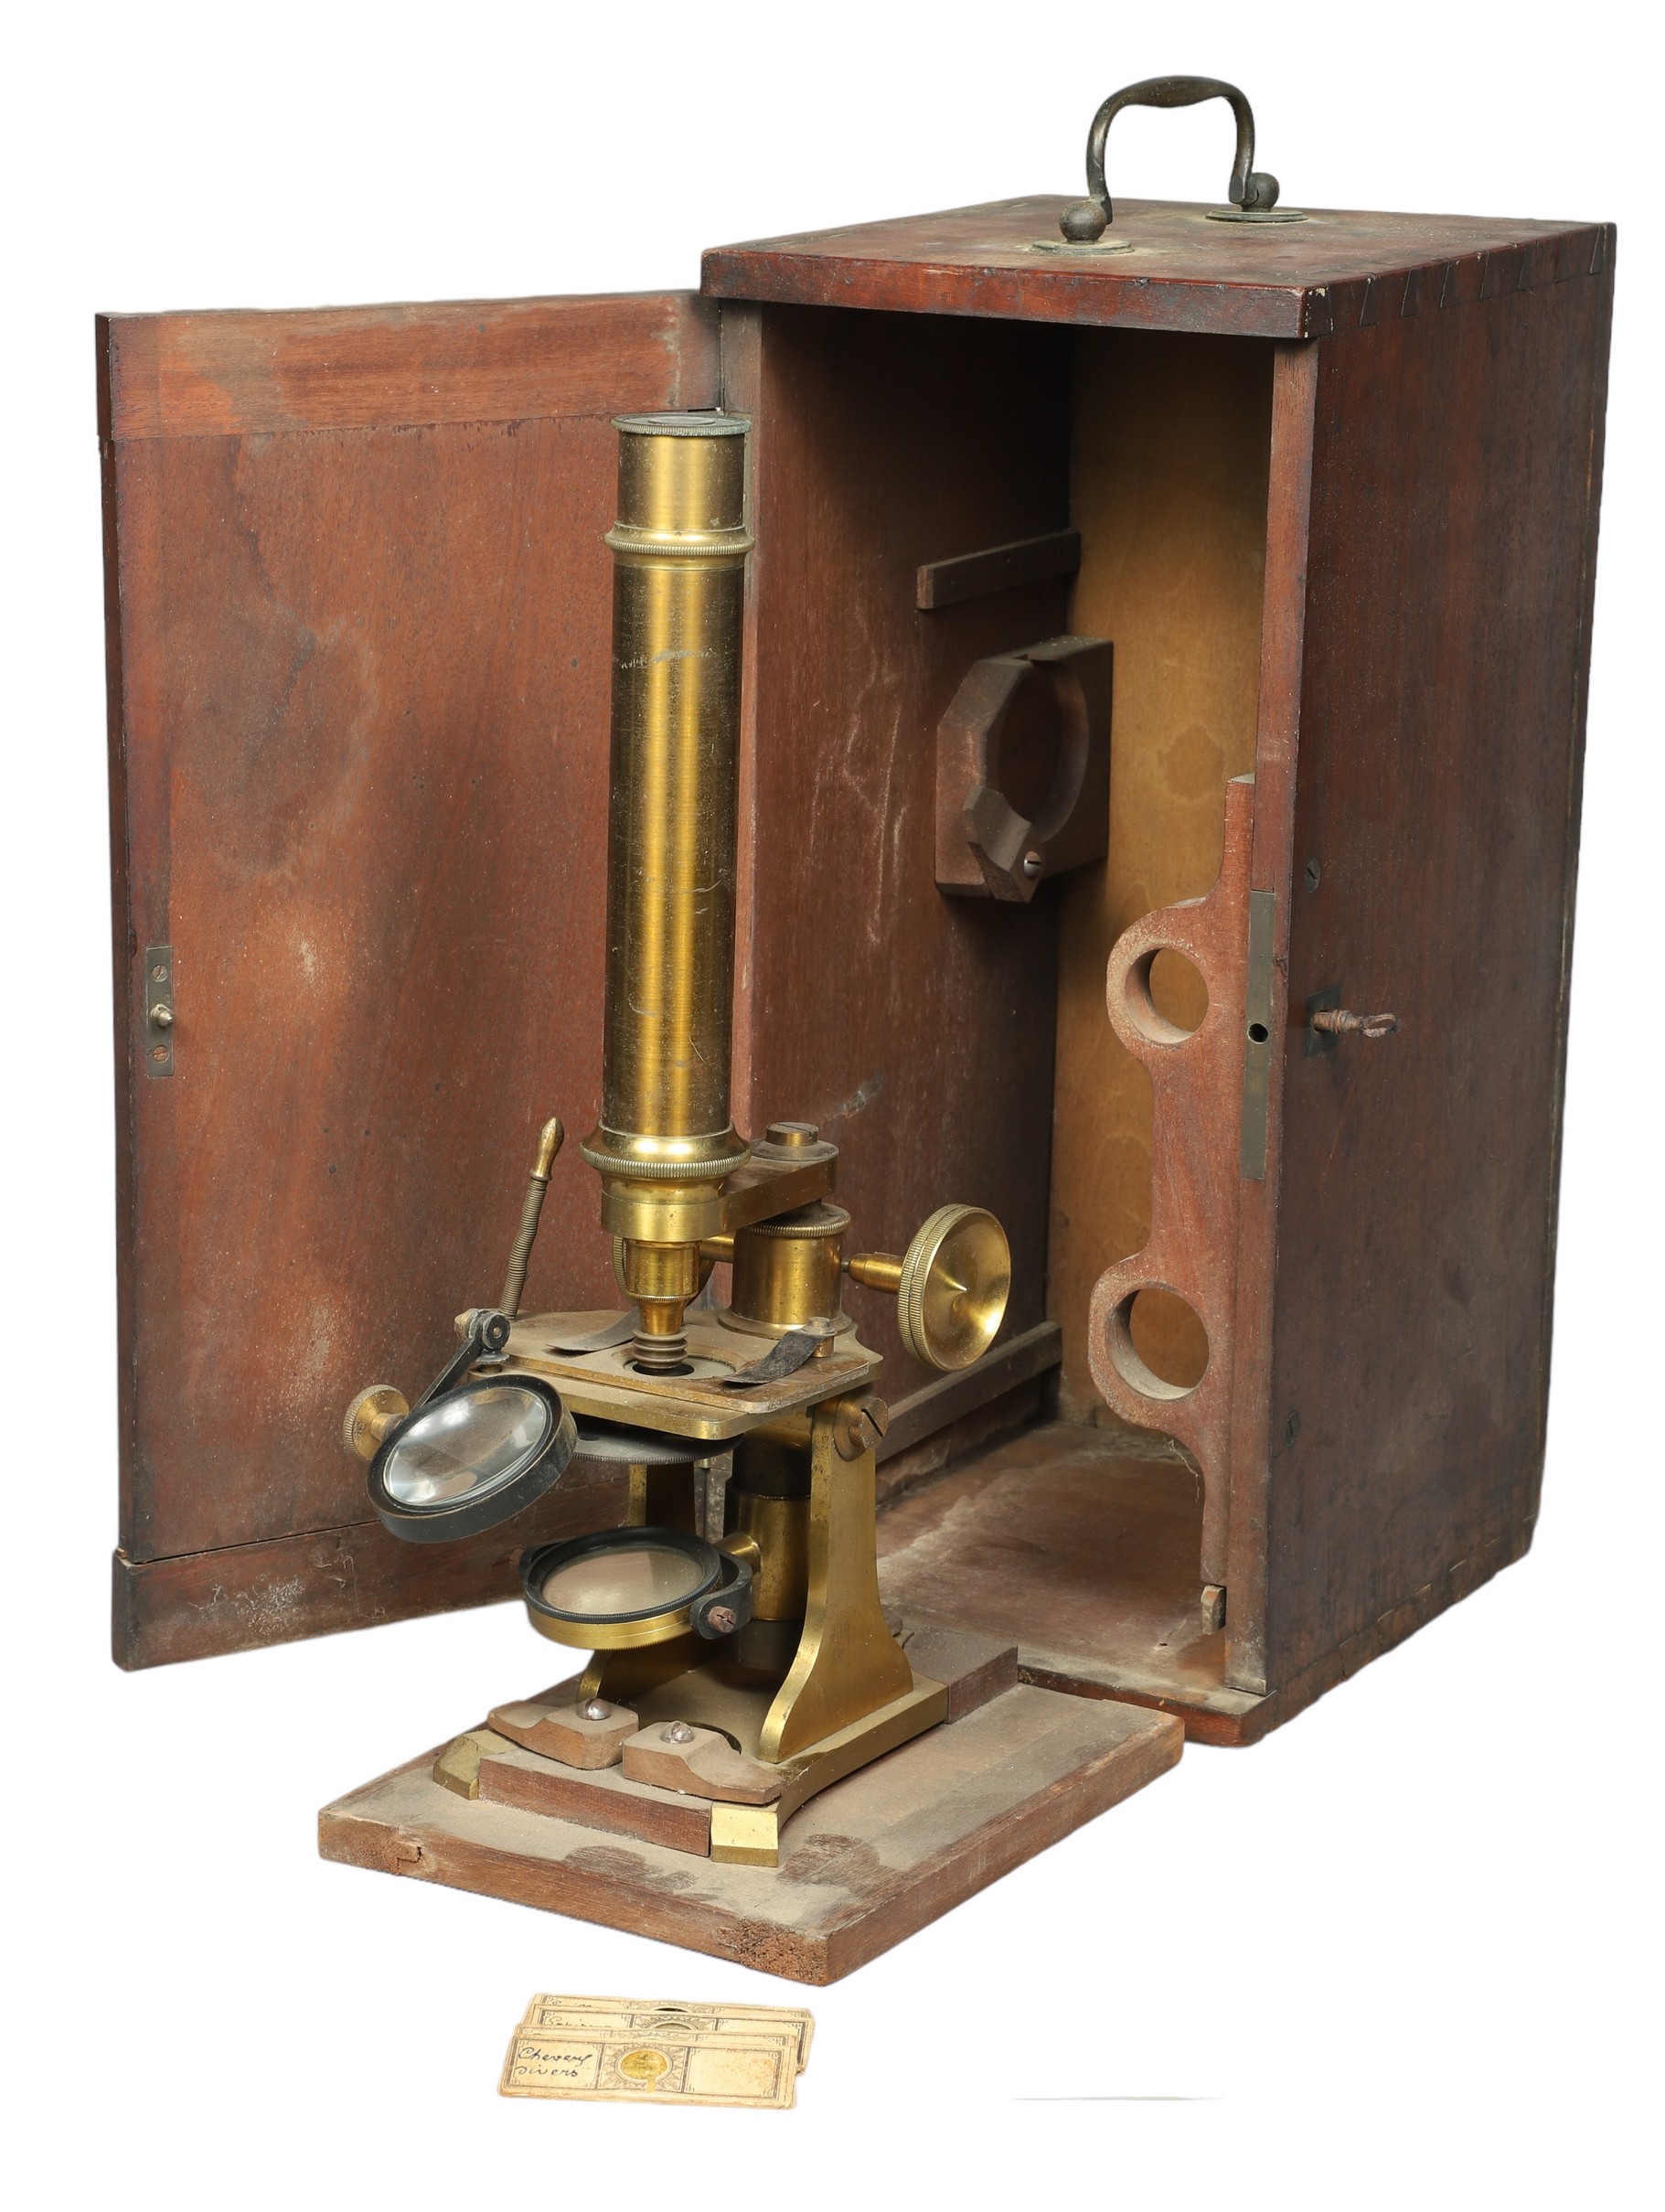 An unsigned 19th century microscope